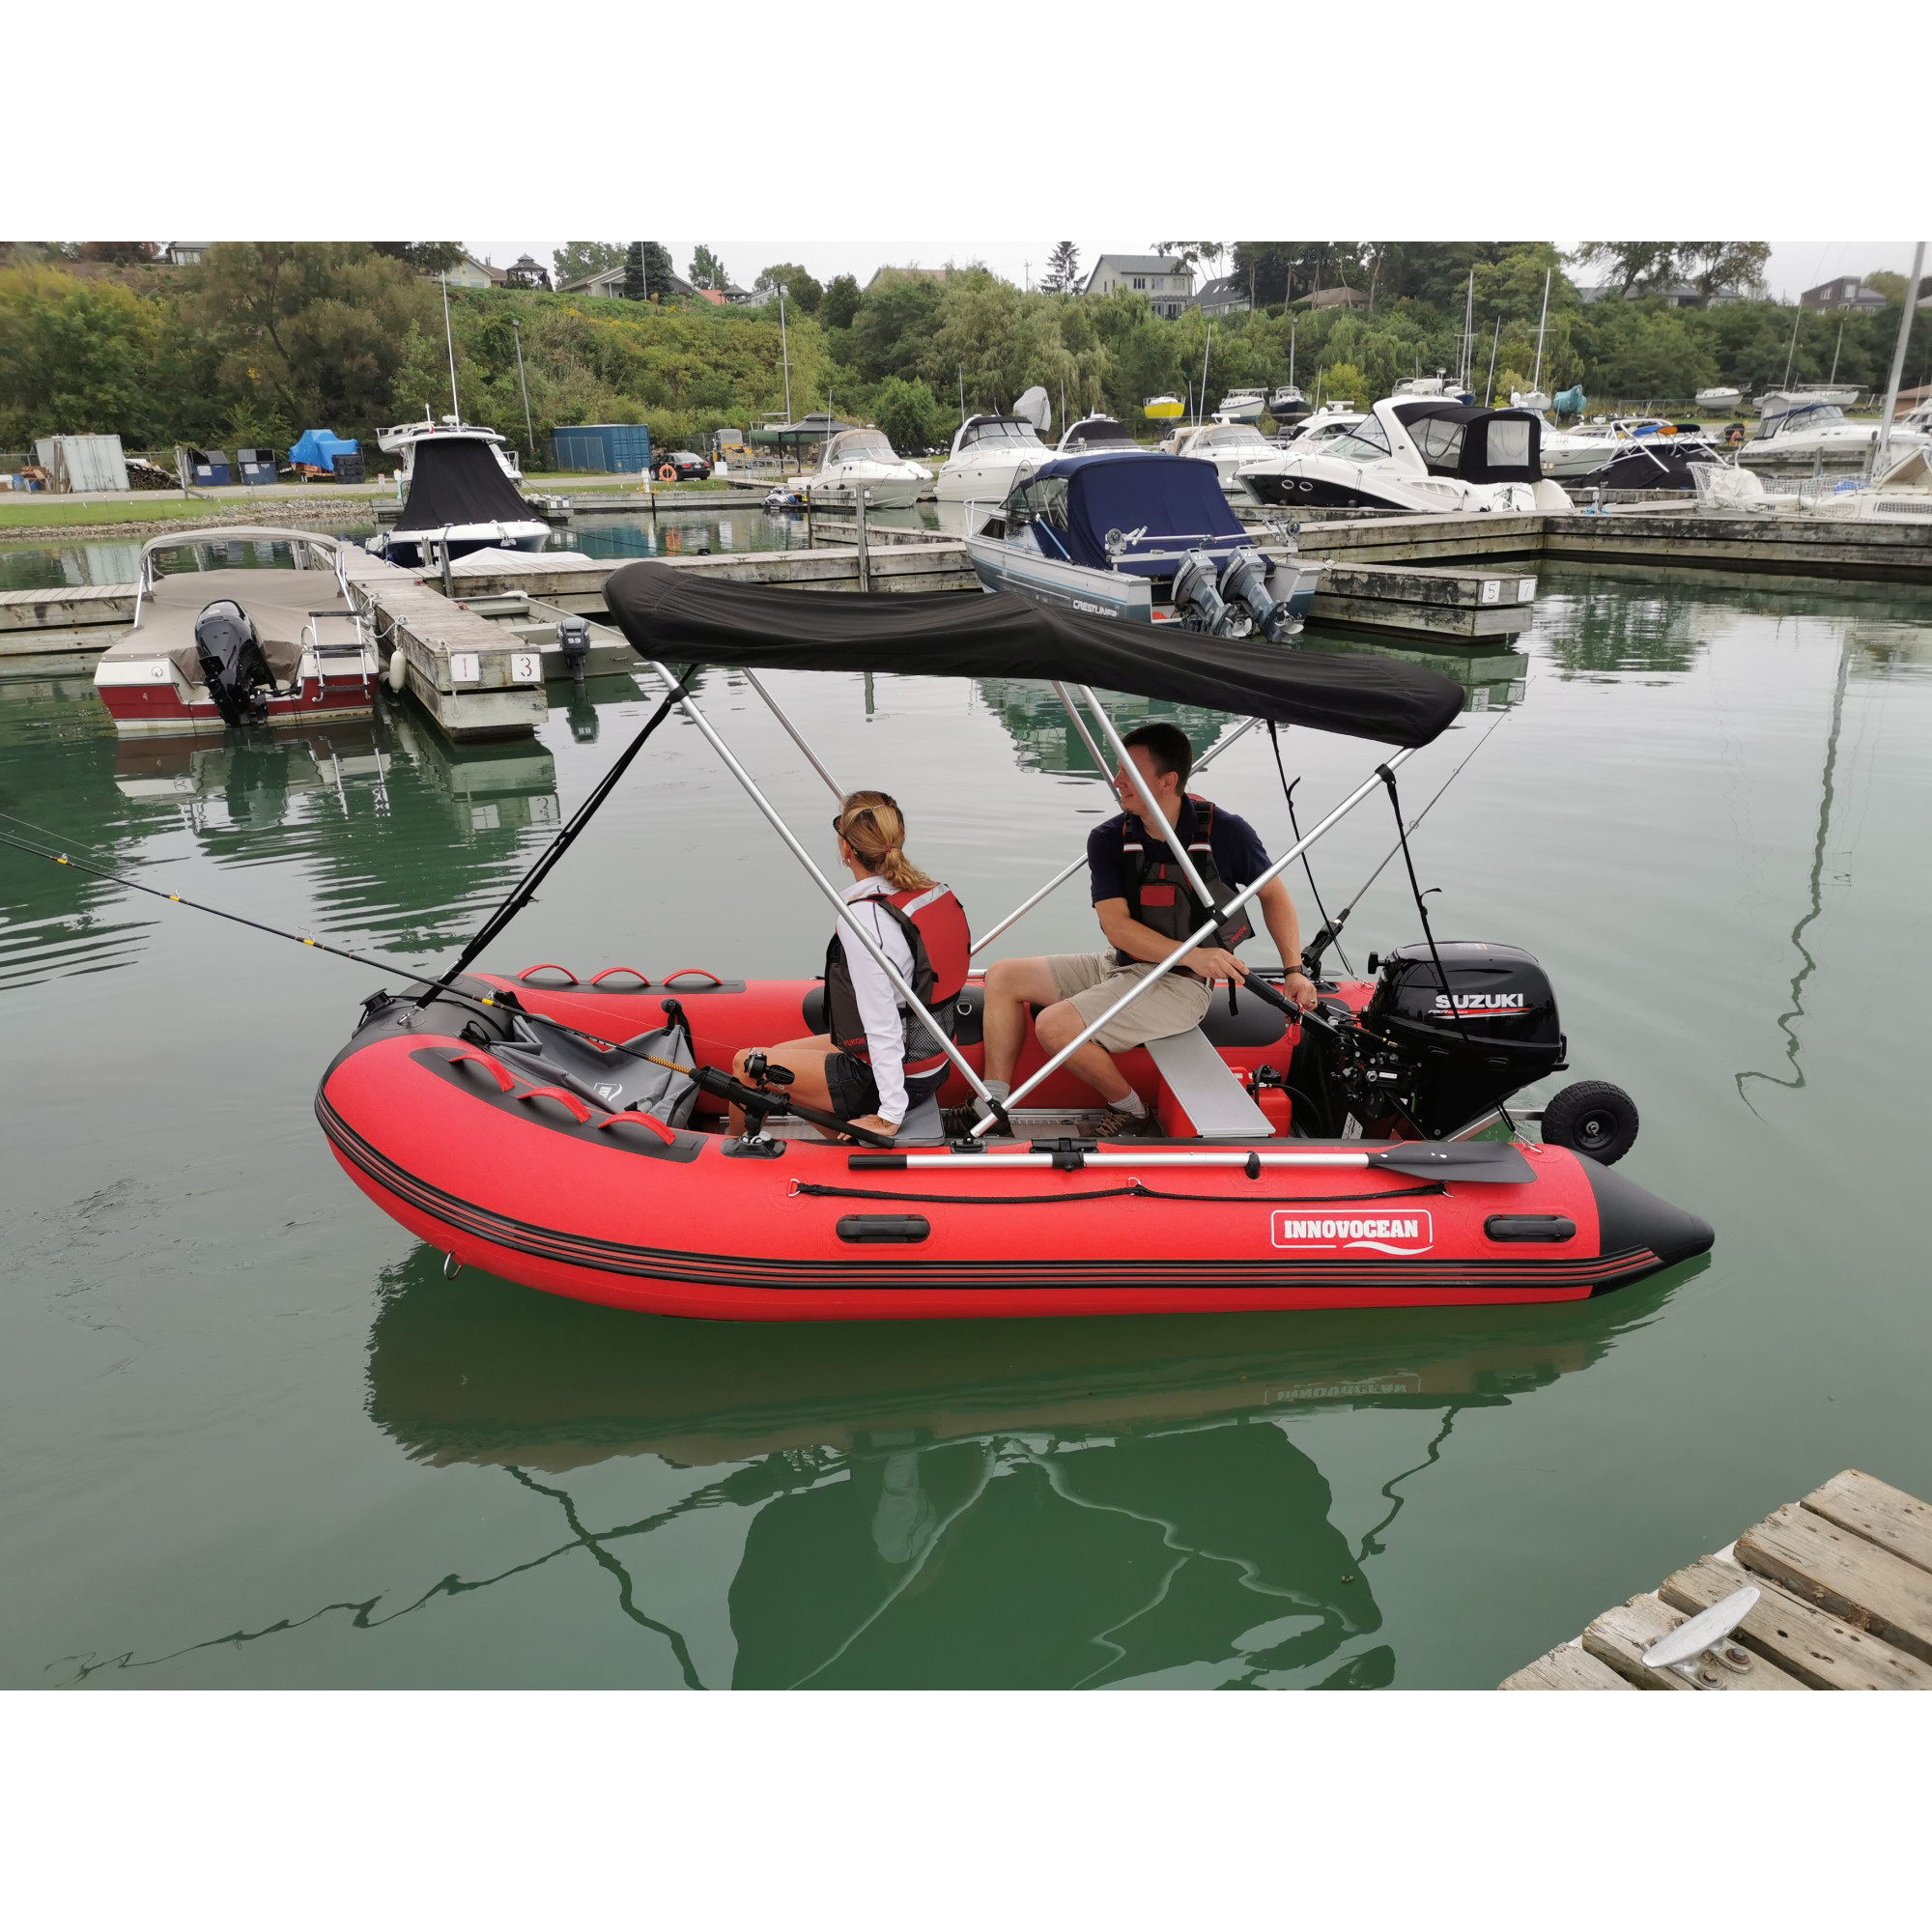 https://innovoceans.com/image/cache/boats/Metal%20Master/1.%20inflatable%20baot%20for%20family-2000x2000.jpg